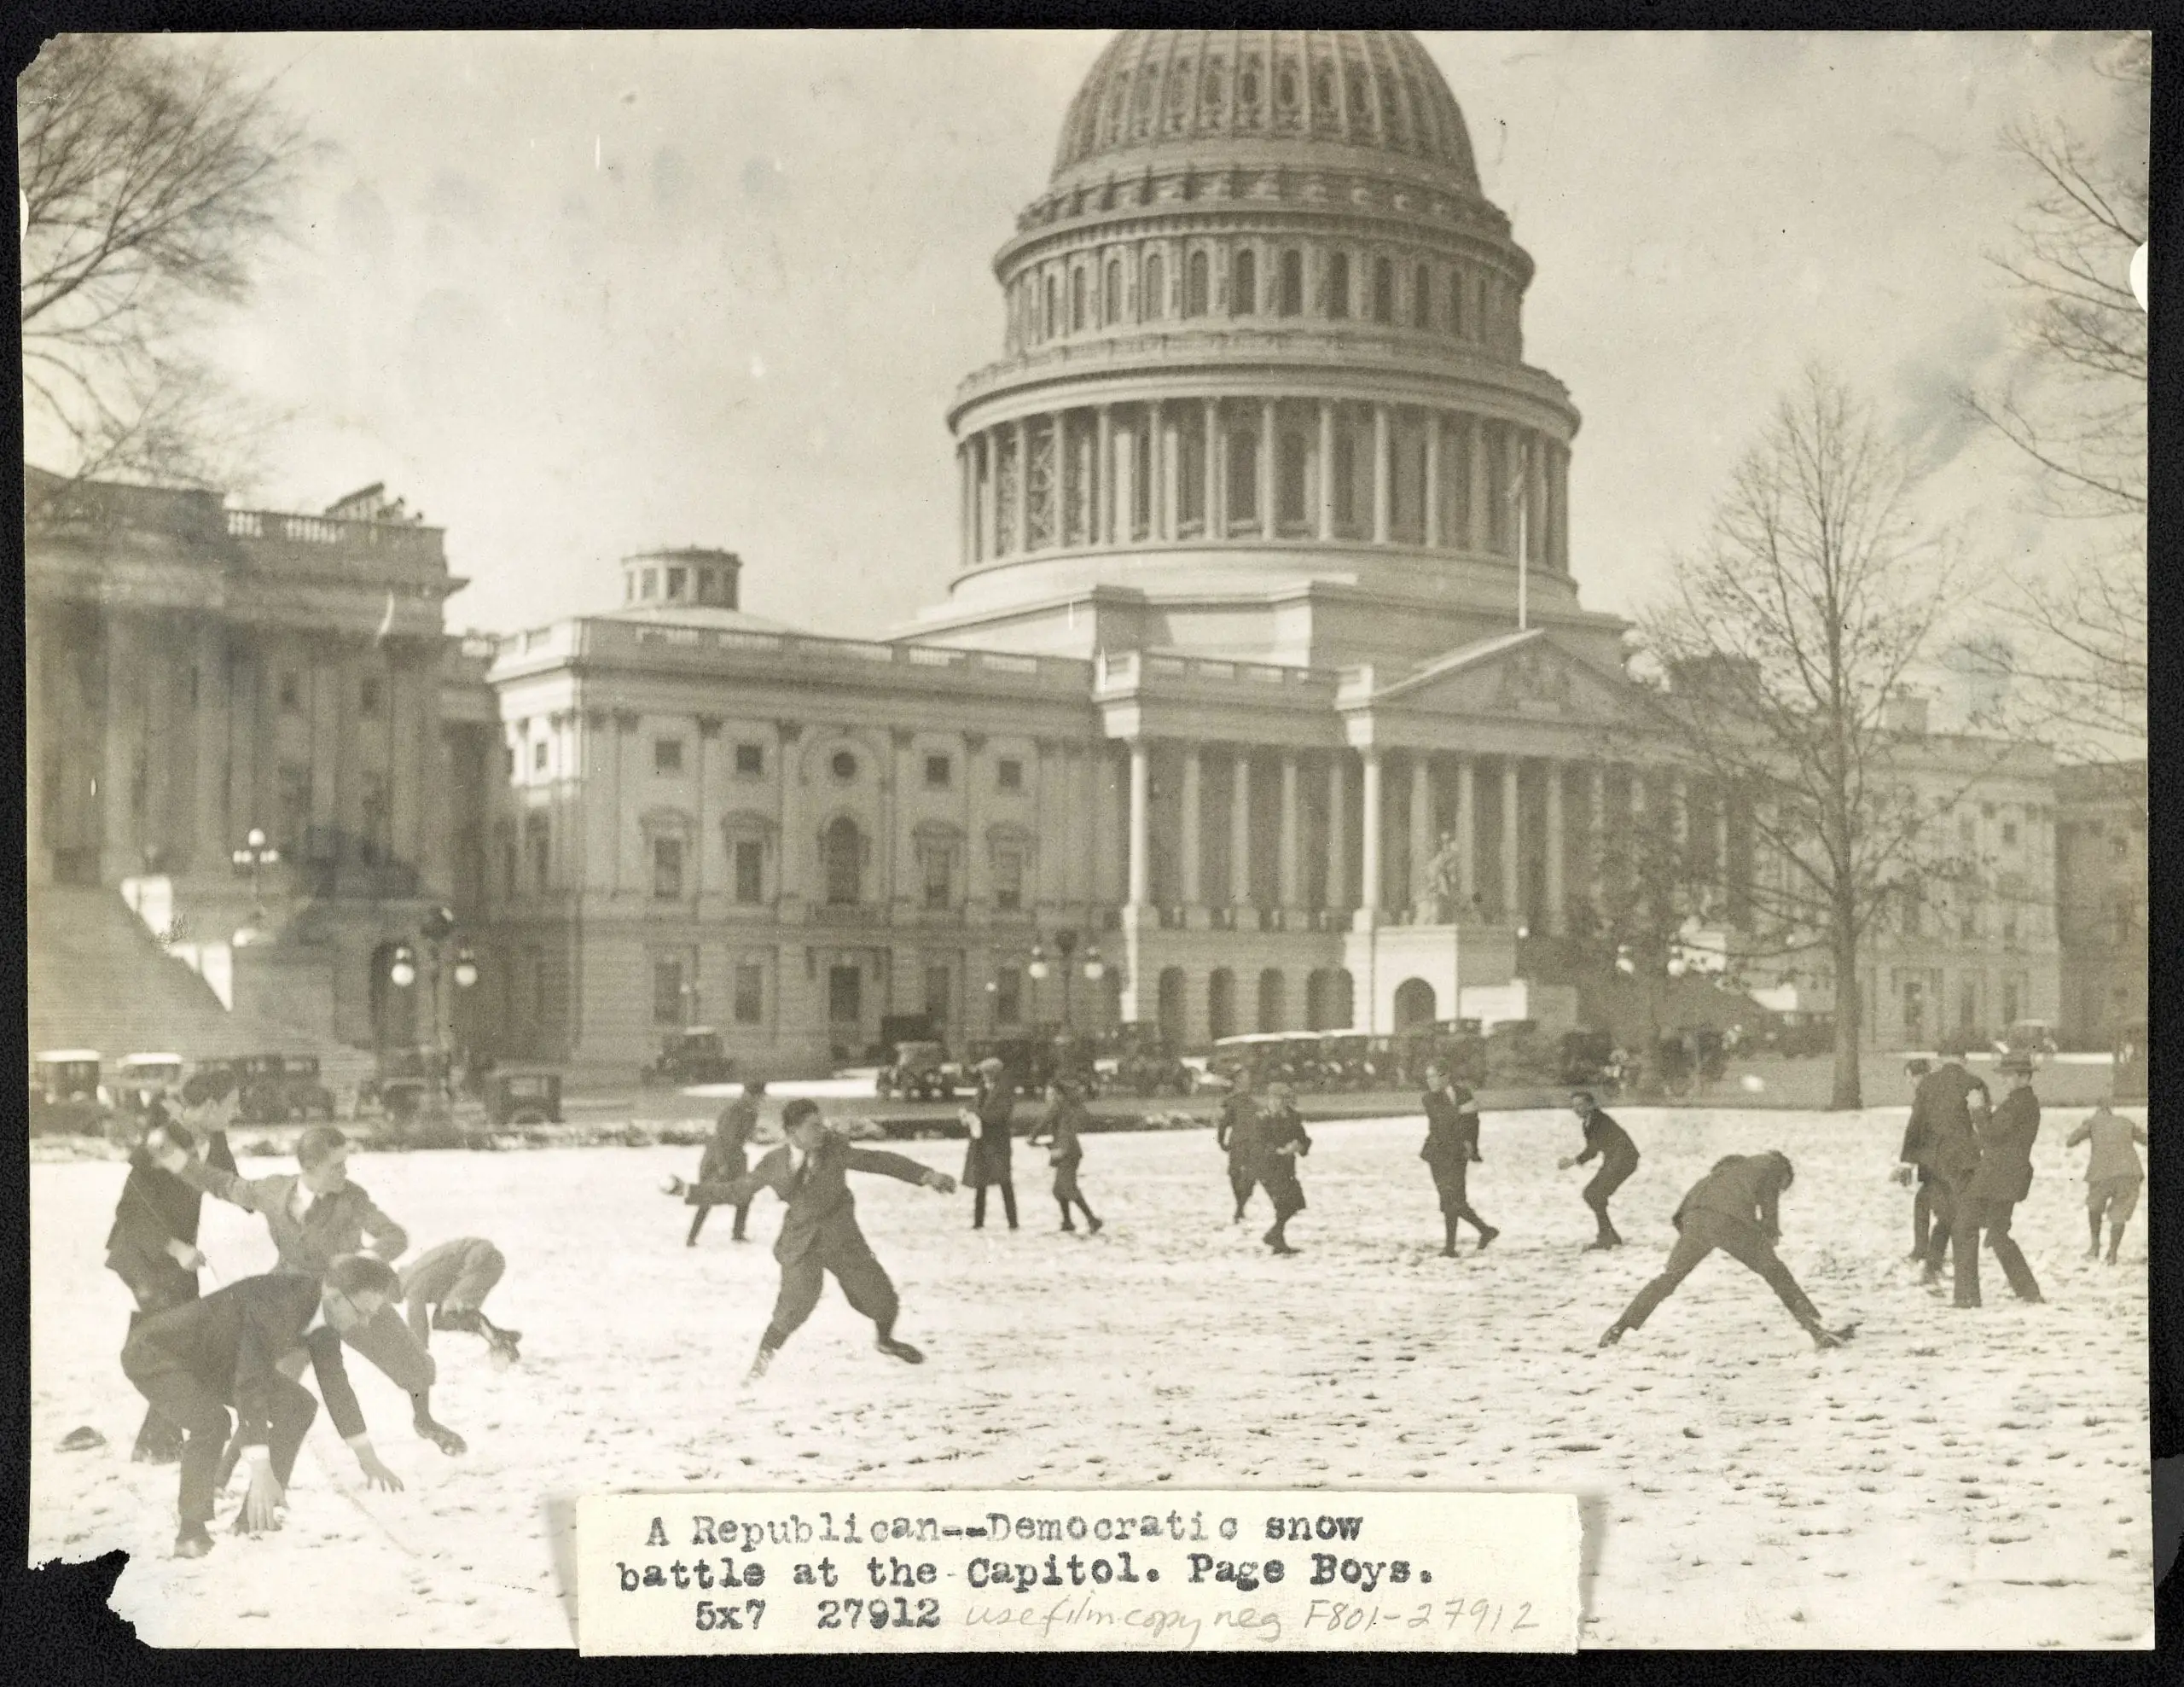 Congressional pages have snowball fight in 1923